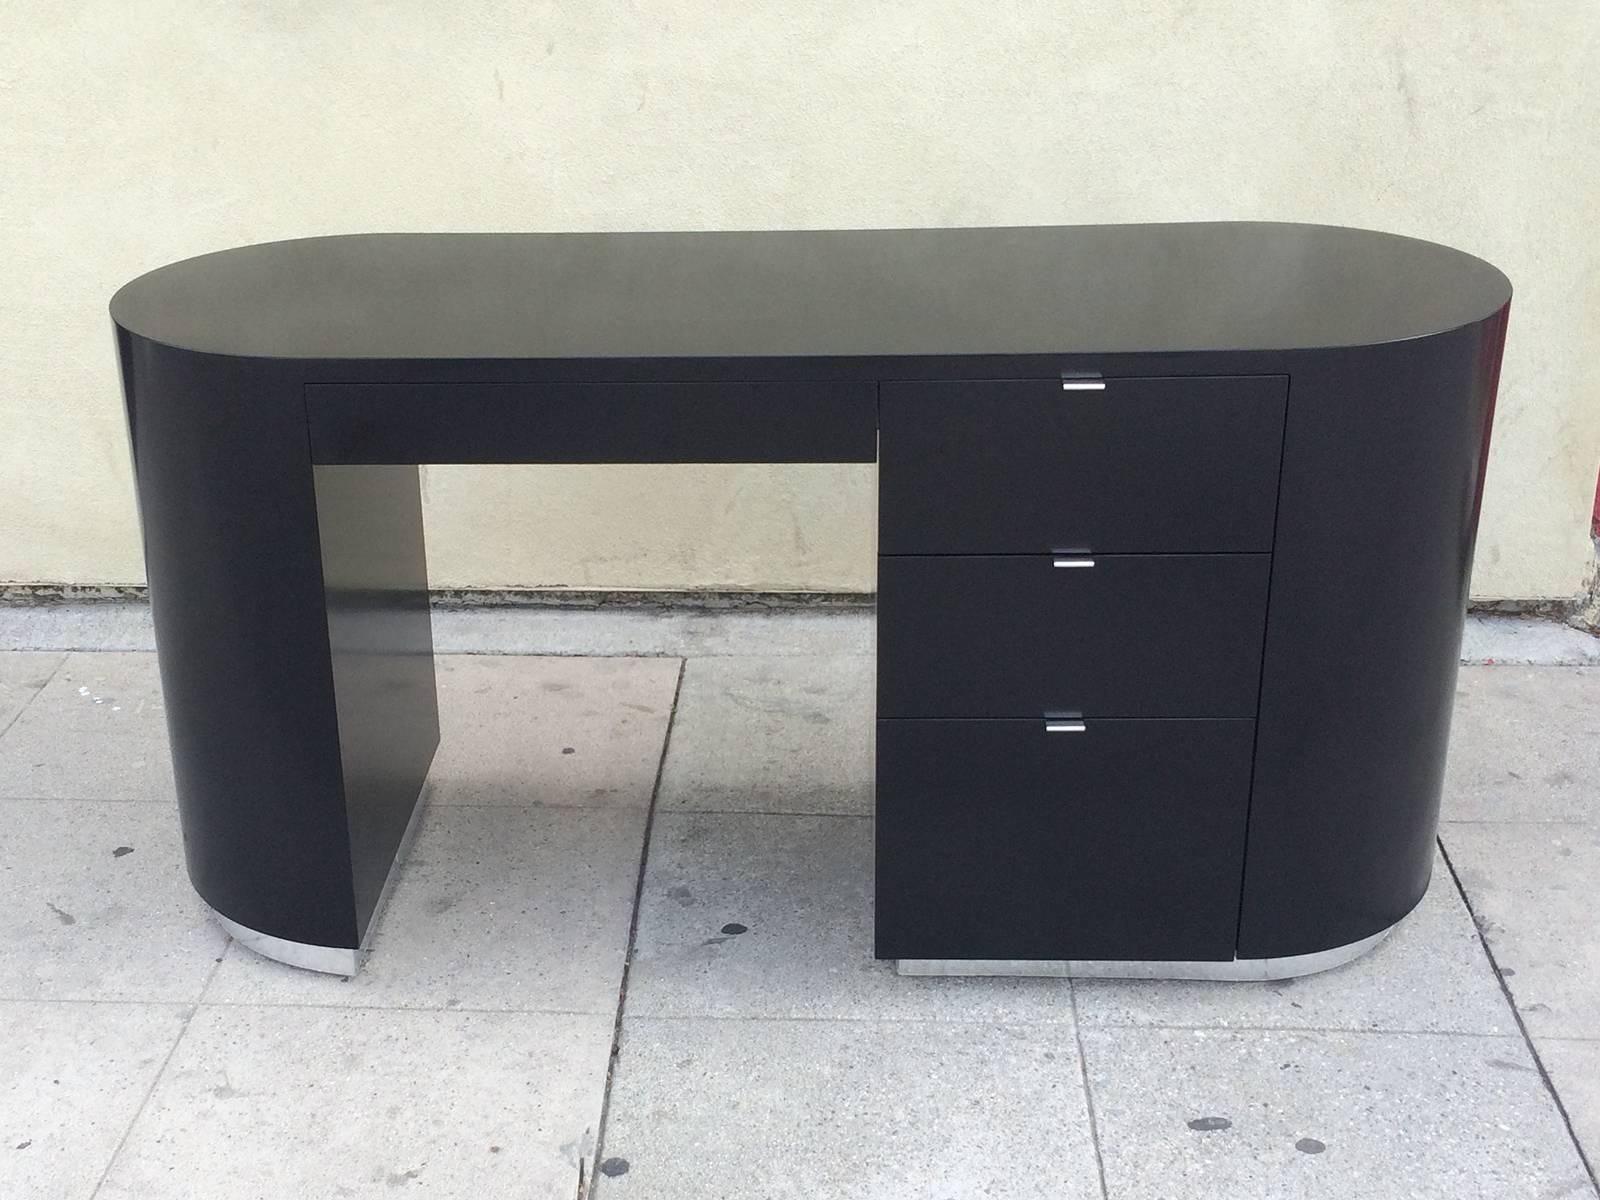 An architectural black lacquer desk with four drawers. This desk features round sides, three inches stainless steel base  and chrome pulls. 
This desk could have been design by Karl Springer or Pace.  It is part of a bedroom set including a long